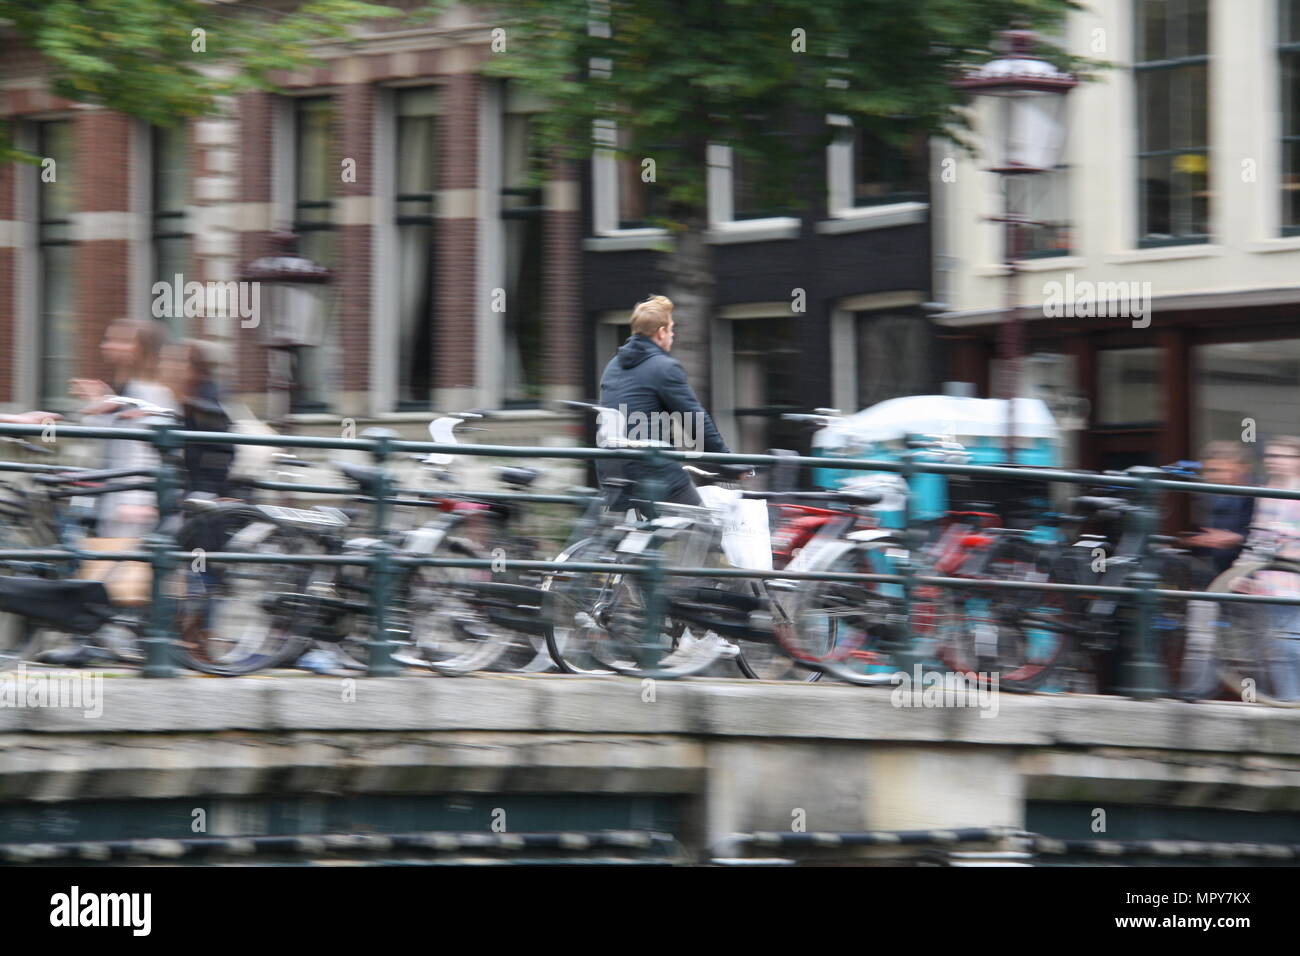 A man rides his bicycle across a canal in Amsterdam, the Netherlands. Stock Photo